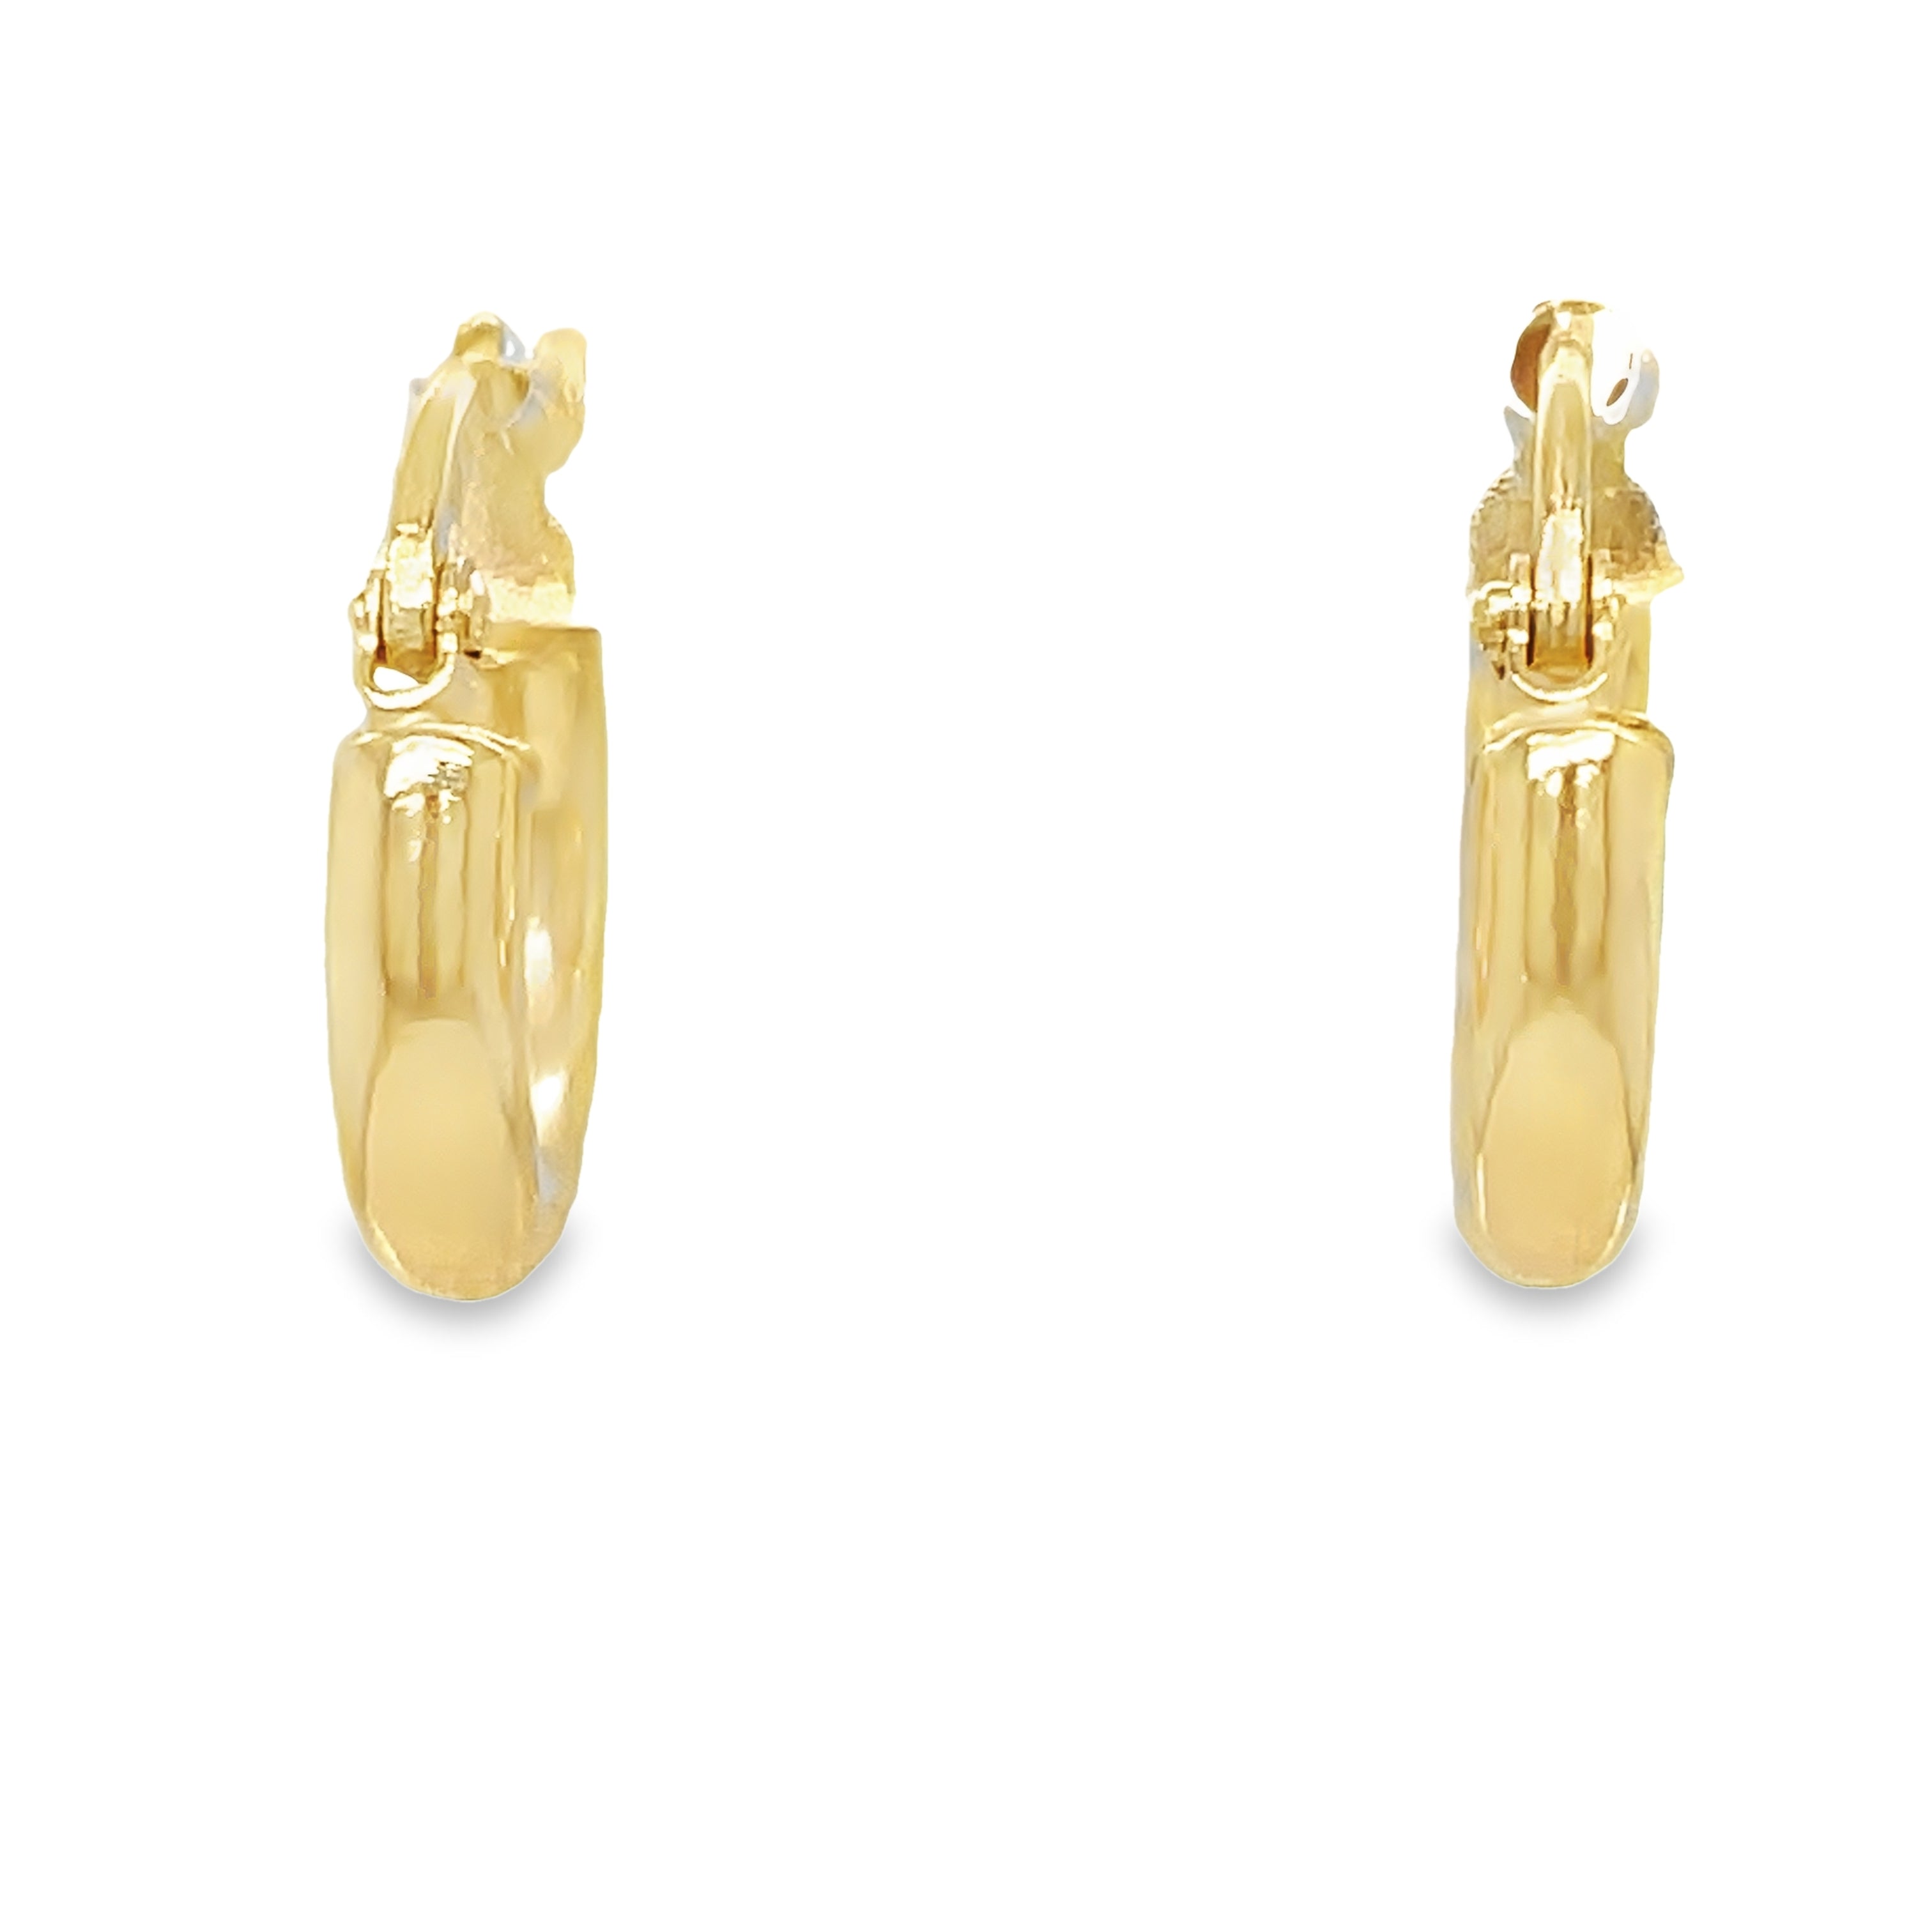 Experience elegance and style with our 14k Italian Yellow Gold Small Hoop Earrings! These beautiful earrings are crafted with 14k yellow gold and measure 2.80 mm thick. The secure lever system ensures they stay in place all day, making these 1/4" hoop earrings the perfect addition to any outfit. Elevate your look with these versatile and timeless earrings.